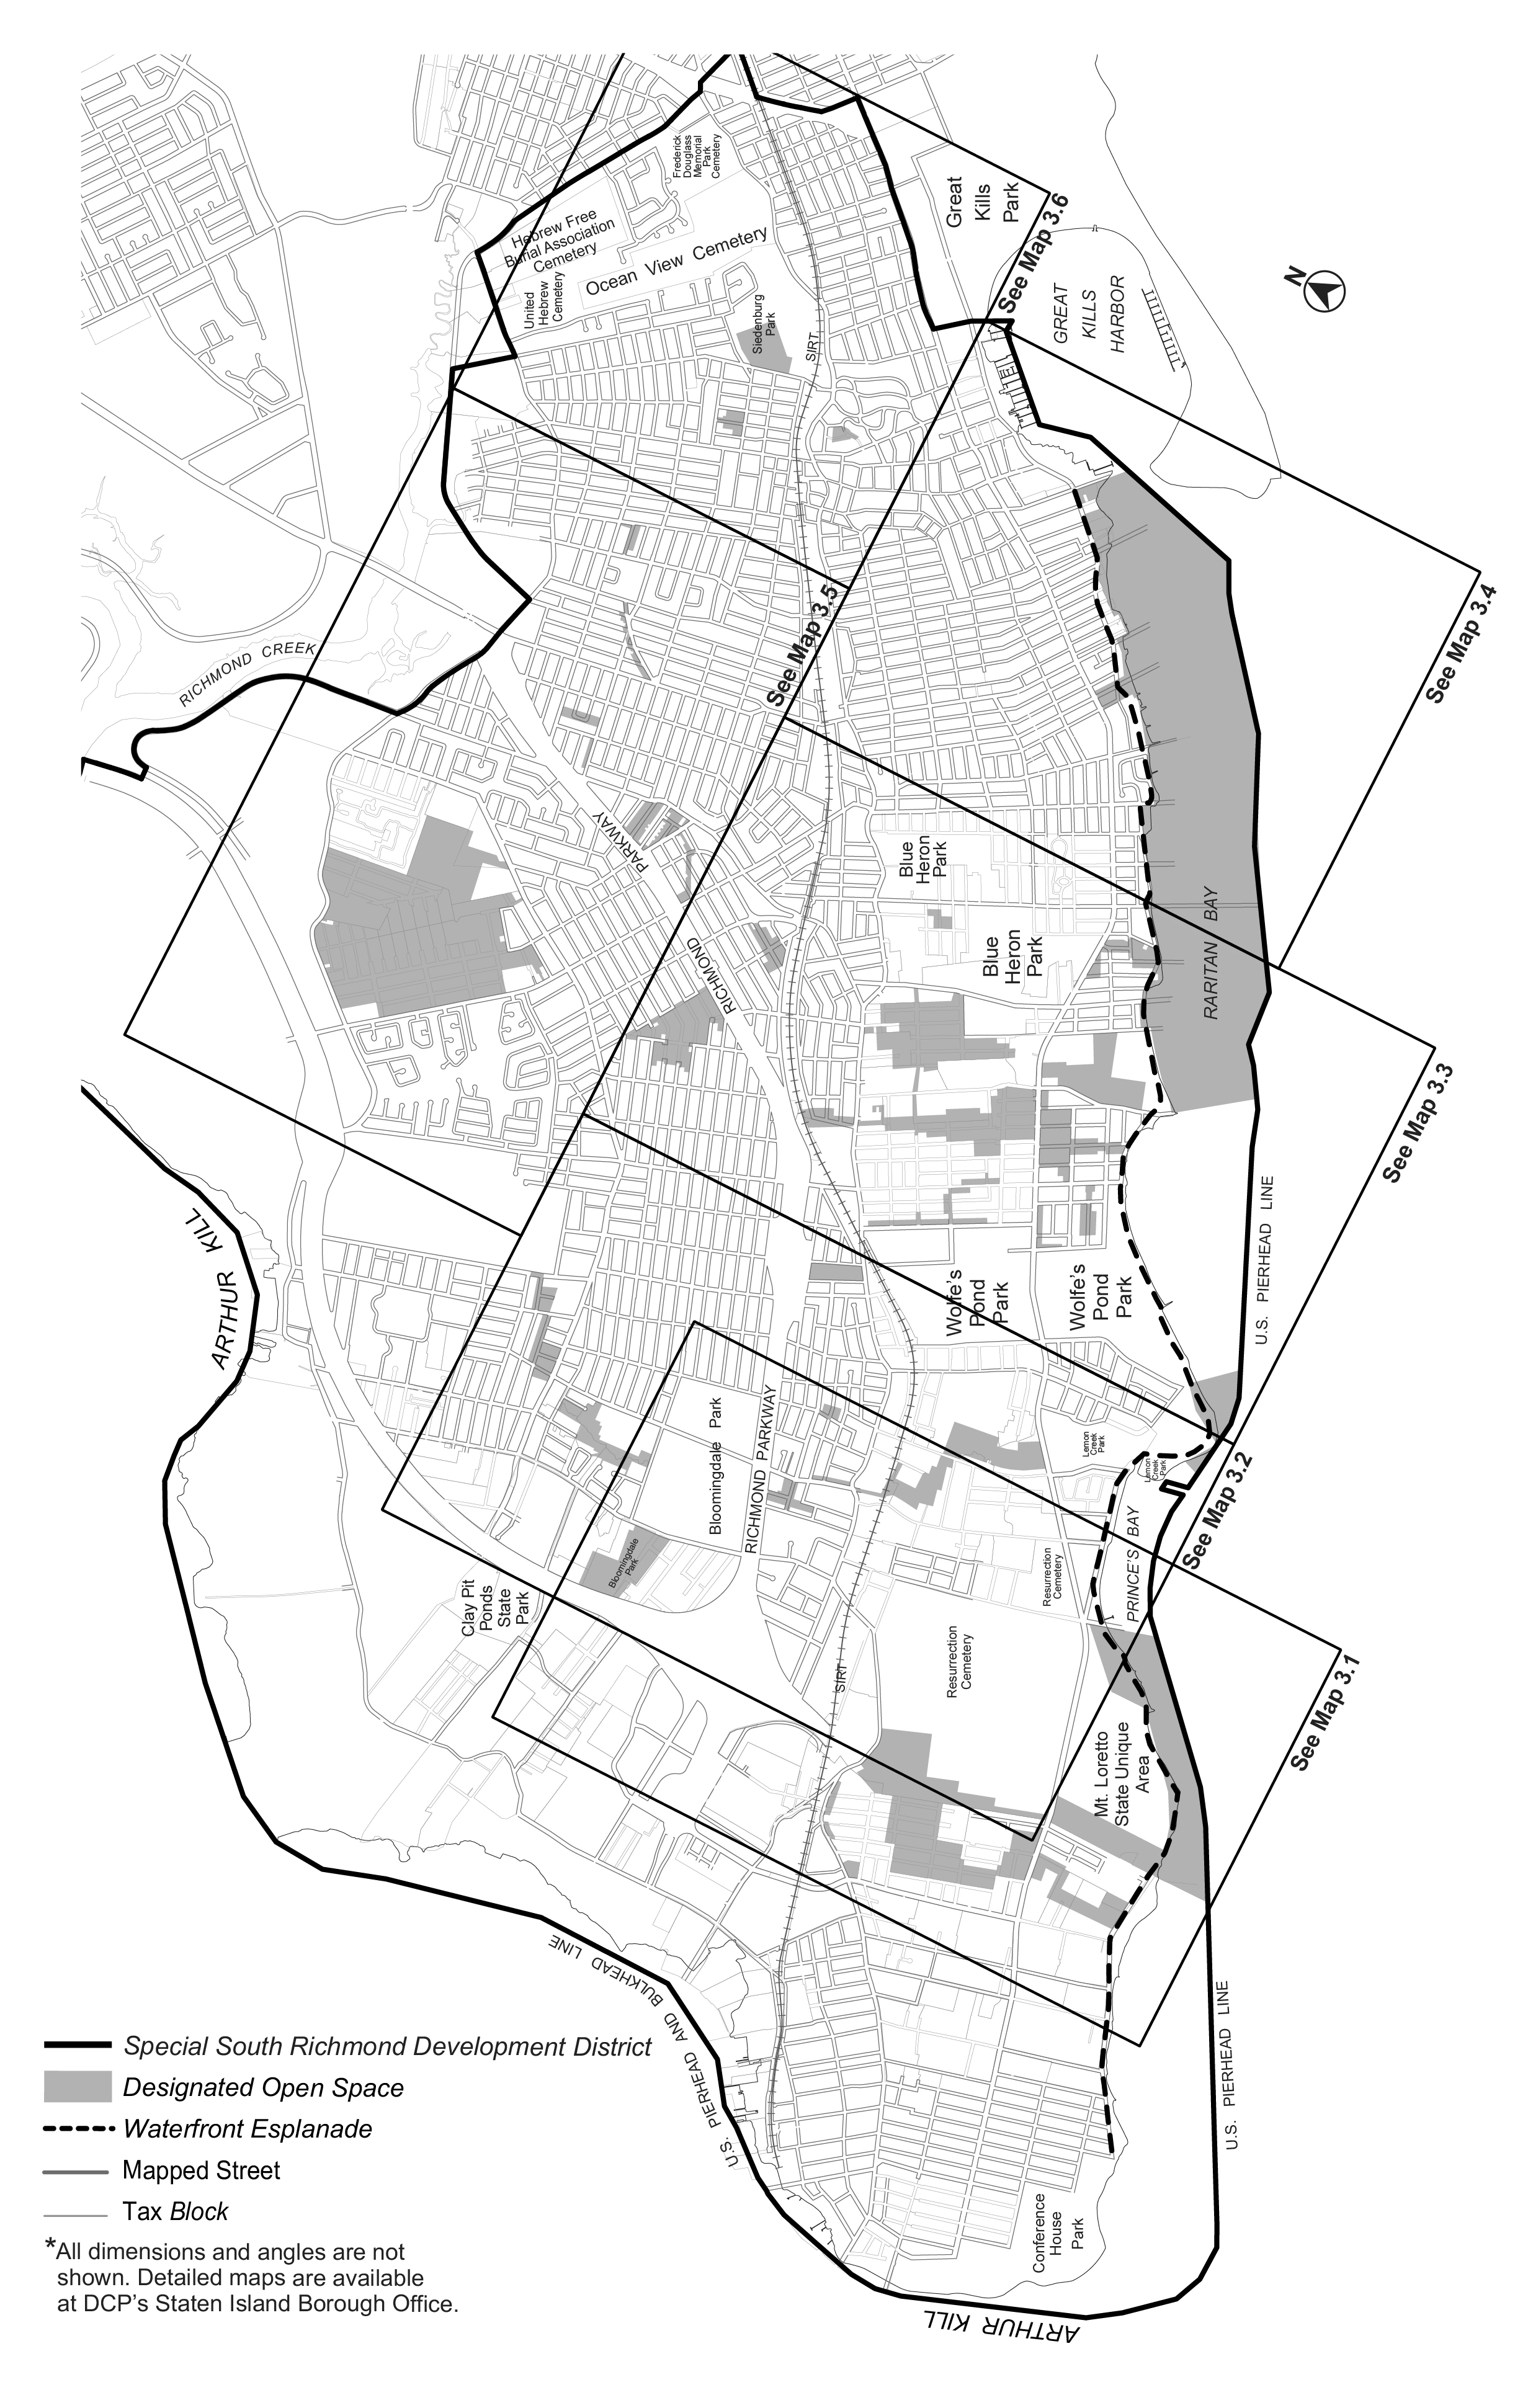  Article X, Chapter 7, Appendix A, Map 3 (Key Map) amended per N 230112 ZRR (South Richmond Zoning Relief) adopted by City Council 11/2/23